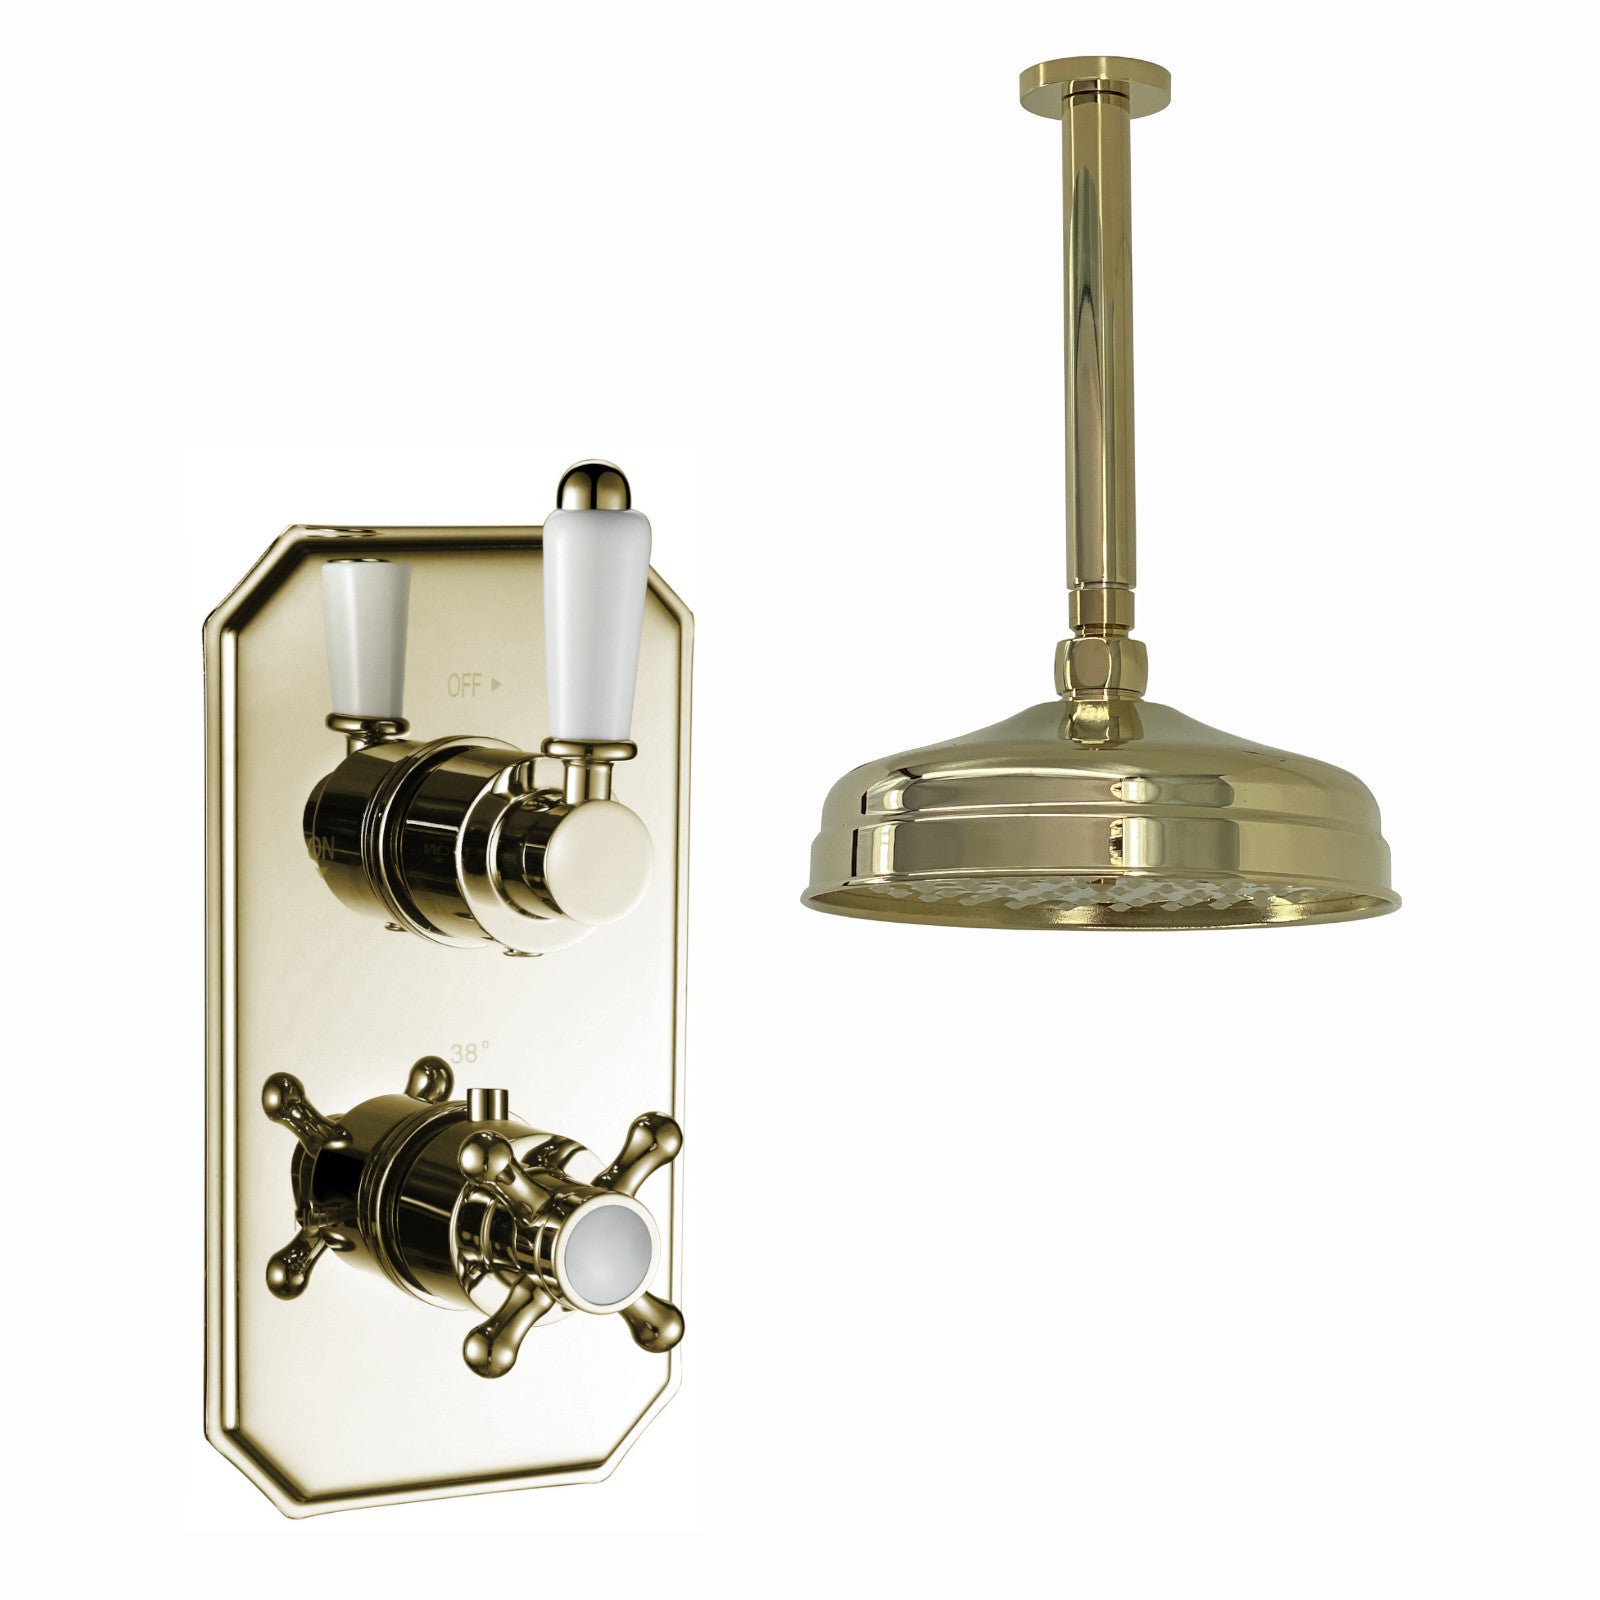 SH0253-01-regent-traditional-crosshead-and-white-lever-concealed-thermostatic-shower-set-ceiling-fixed-8-shower-head-english-gold-1-outlet